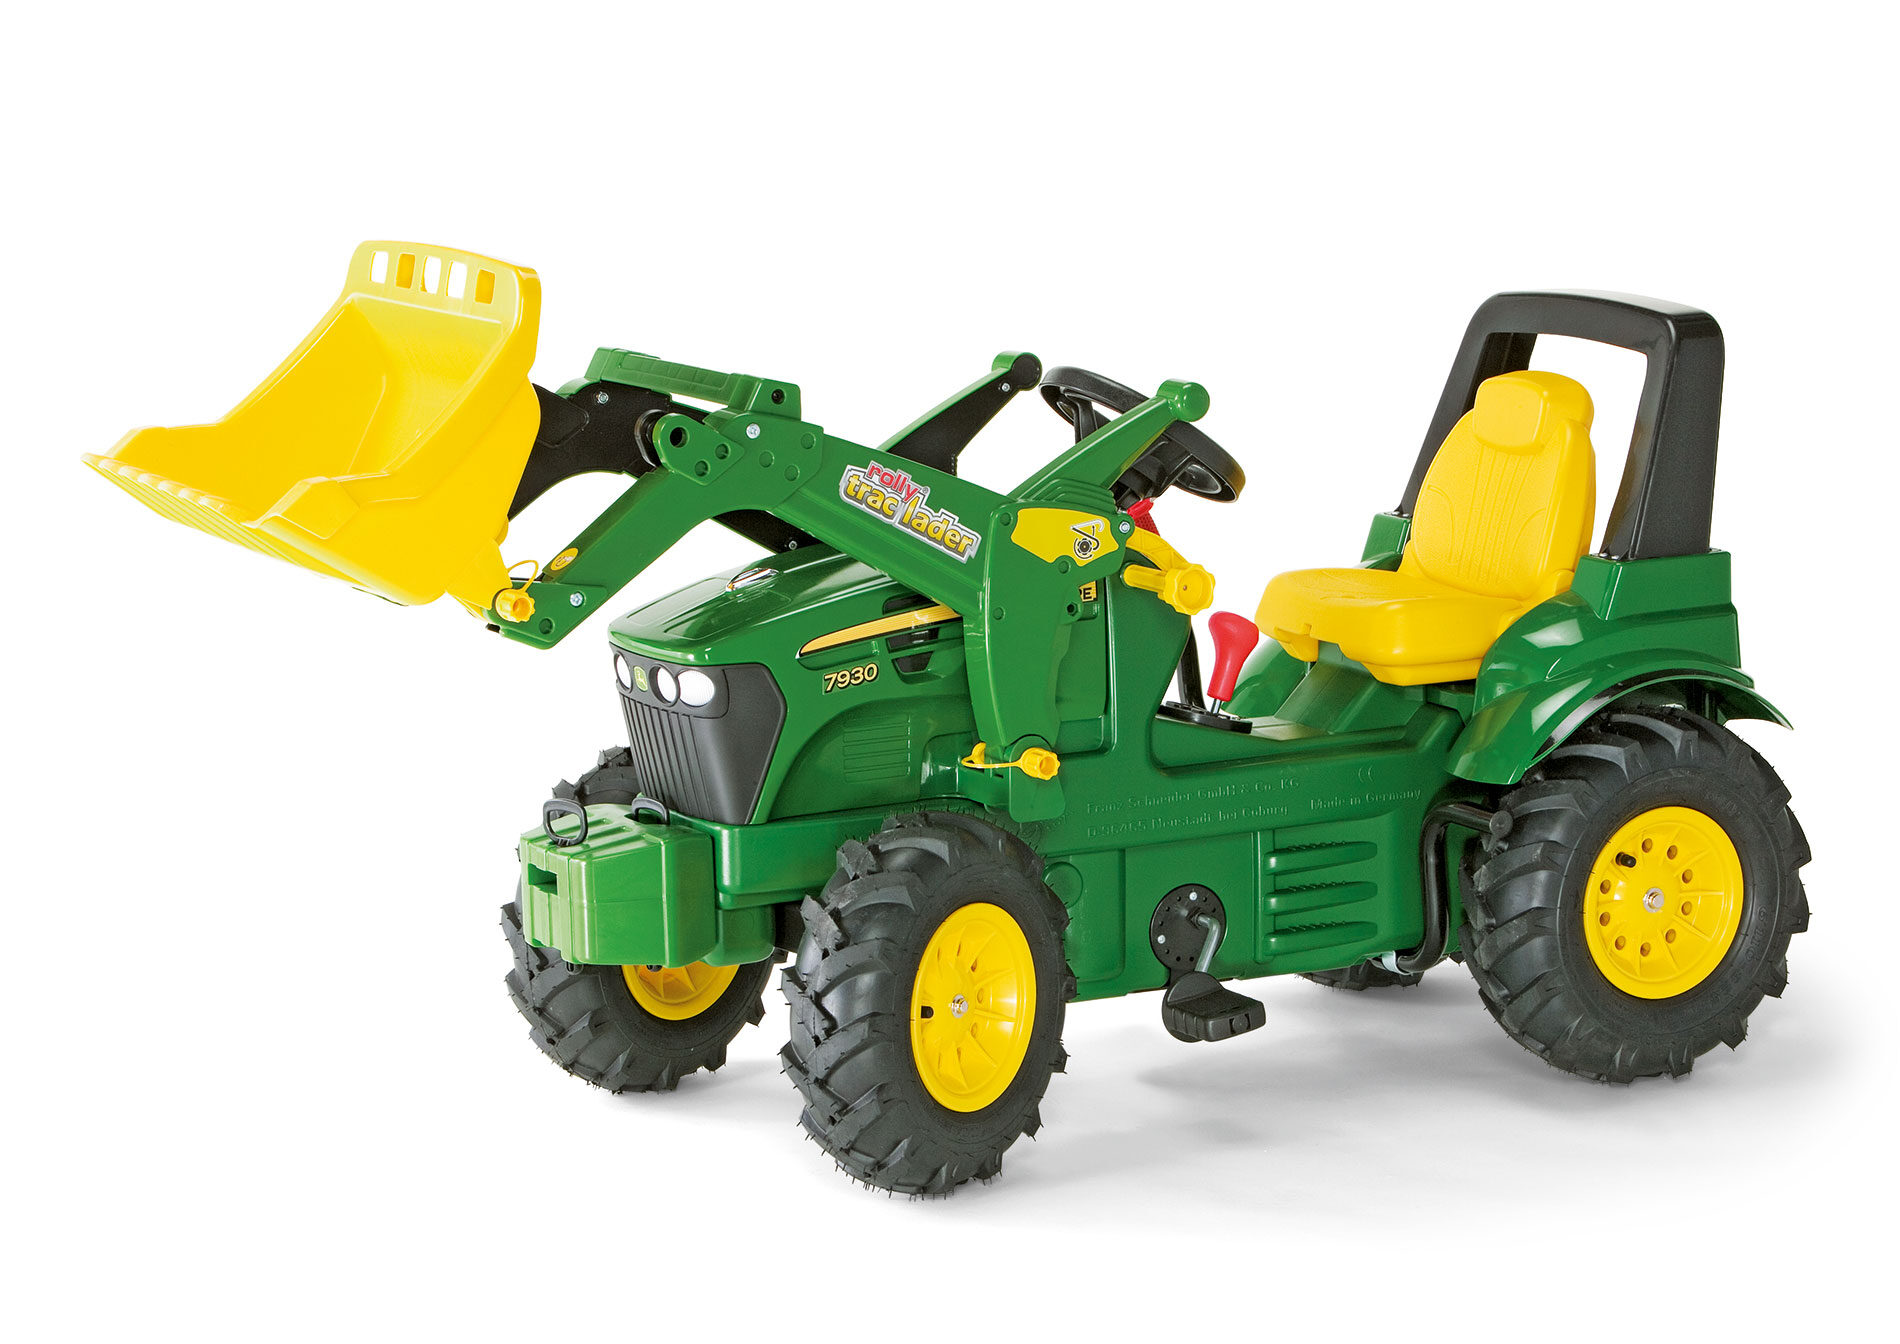 rolly-toys-john-deere-tractor-7930-pedal-ride-on-710126-5088005